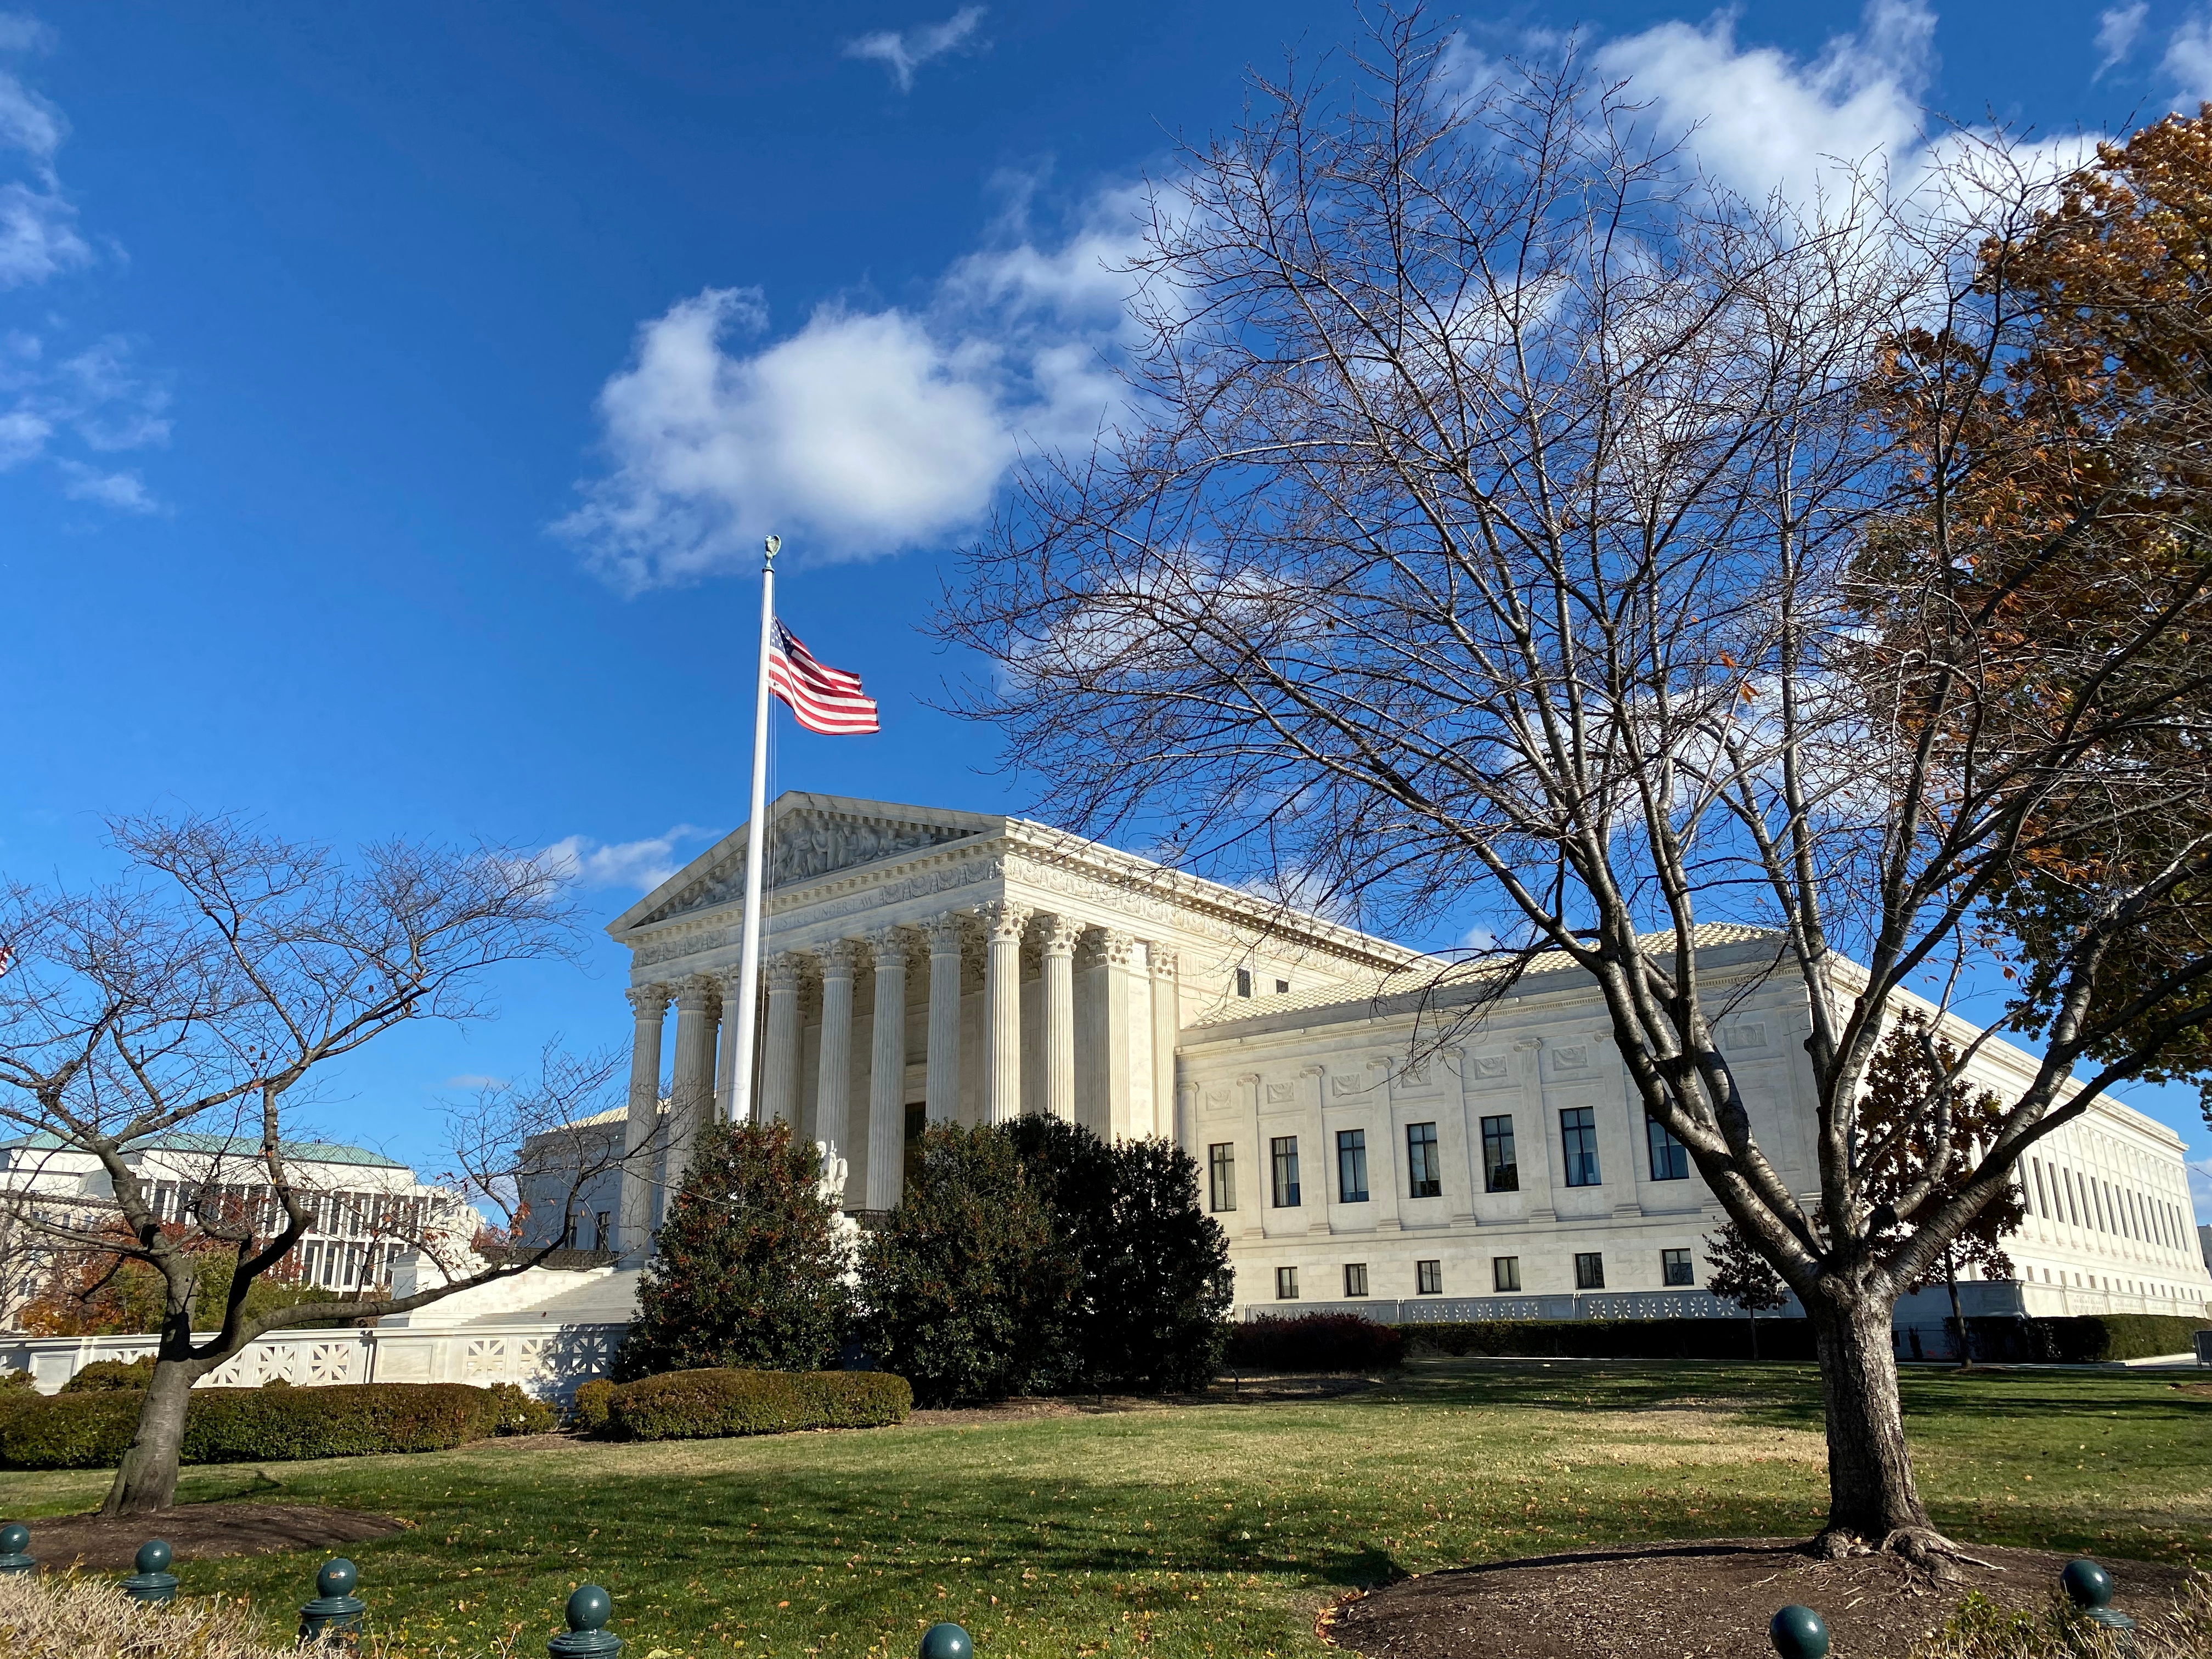 A general view of the U.S. Supreme Court building in Washington